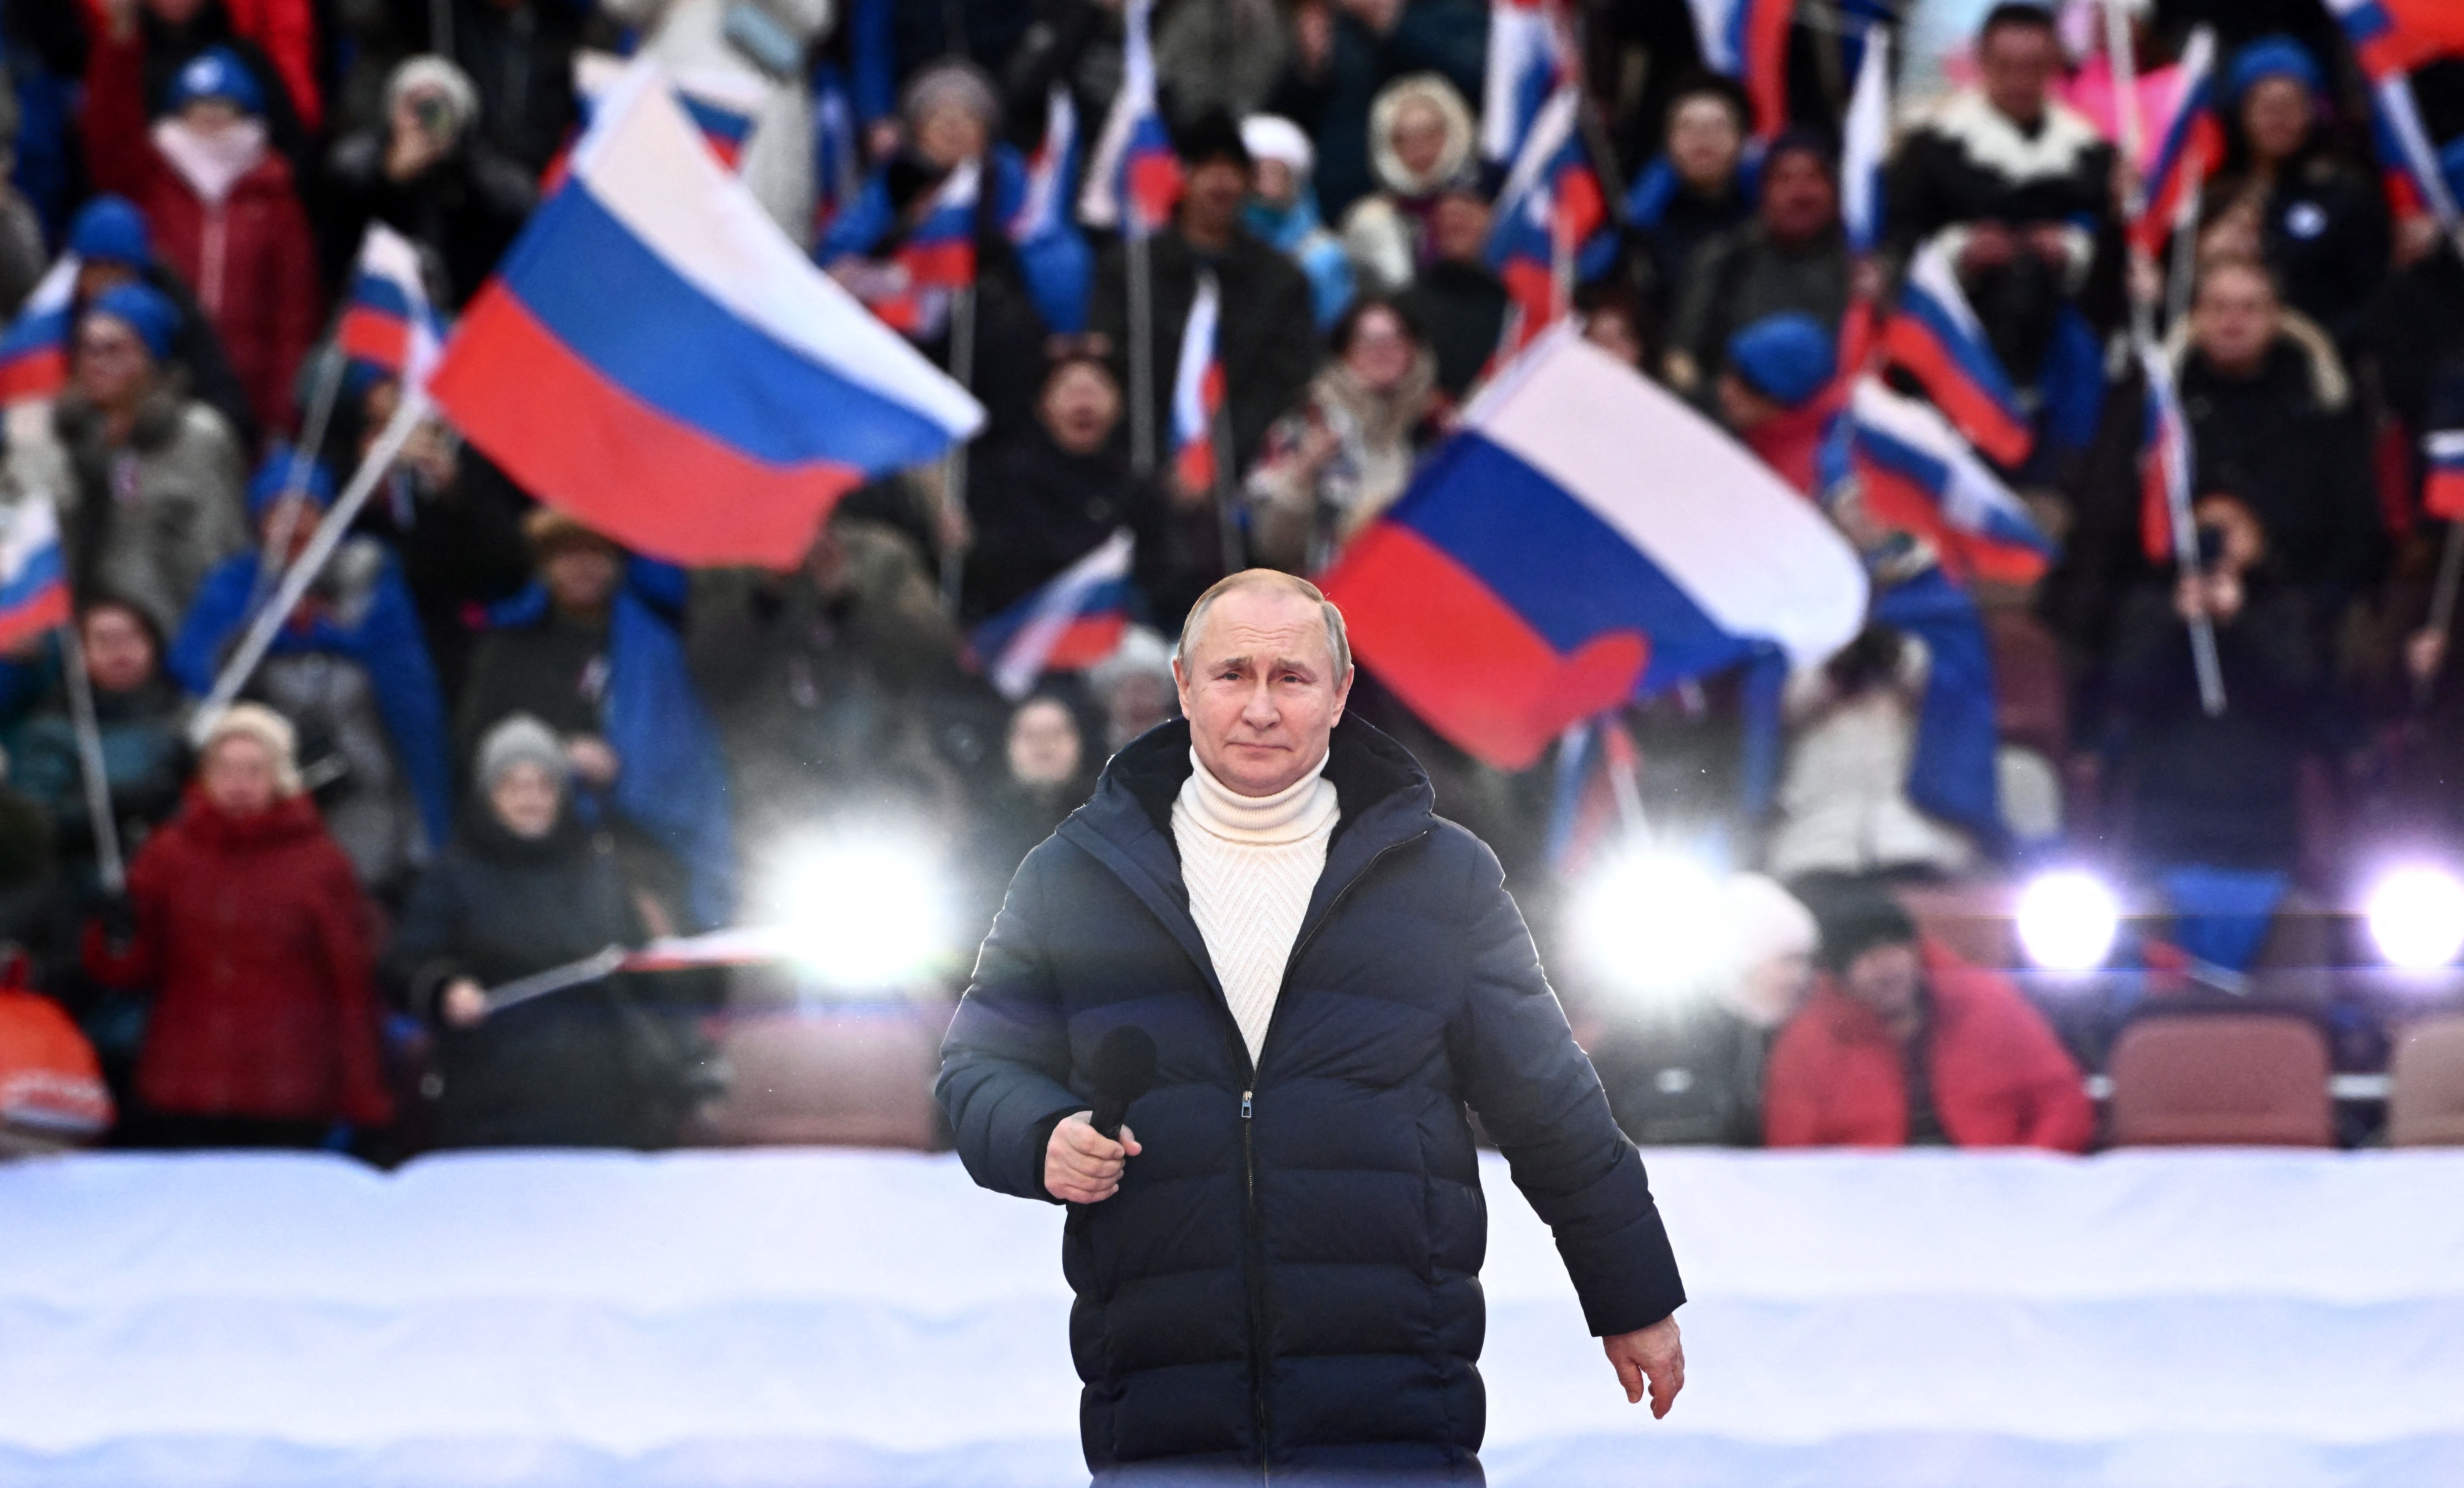 Russian President Vladimir Putin gives a speech at a concert marking the eighth anniversary of Russia's annexation of Crimea on March 18 in Moscow.